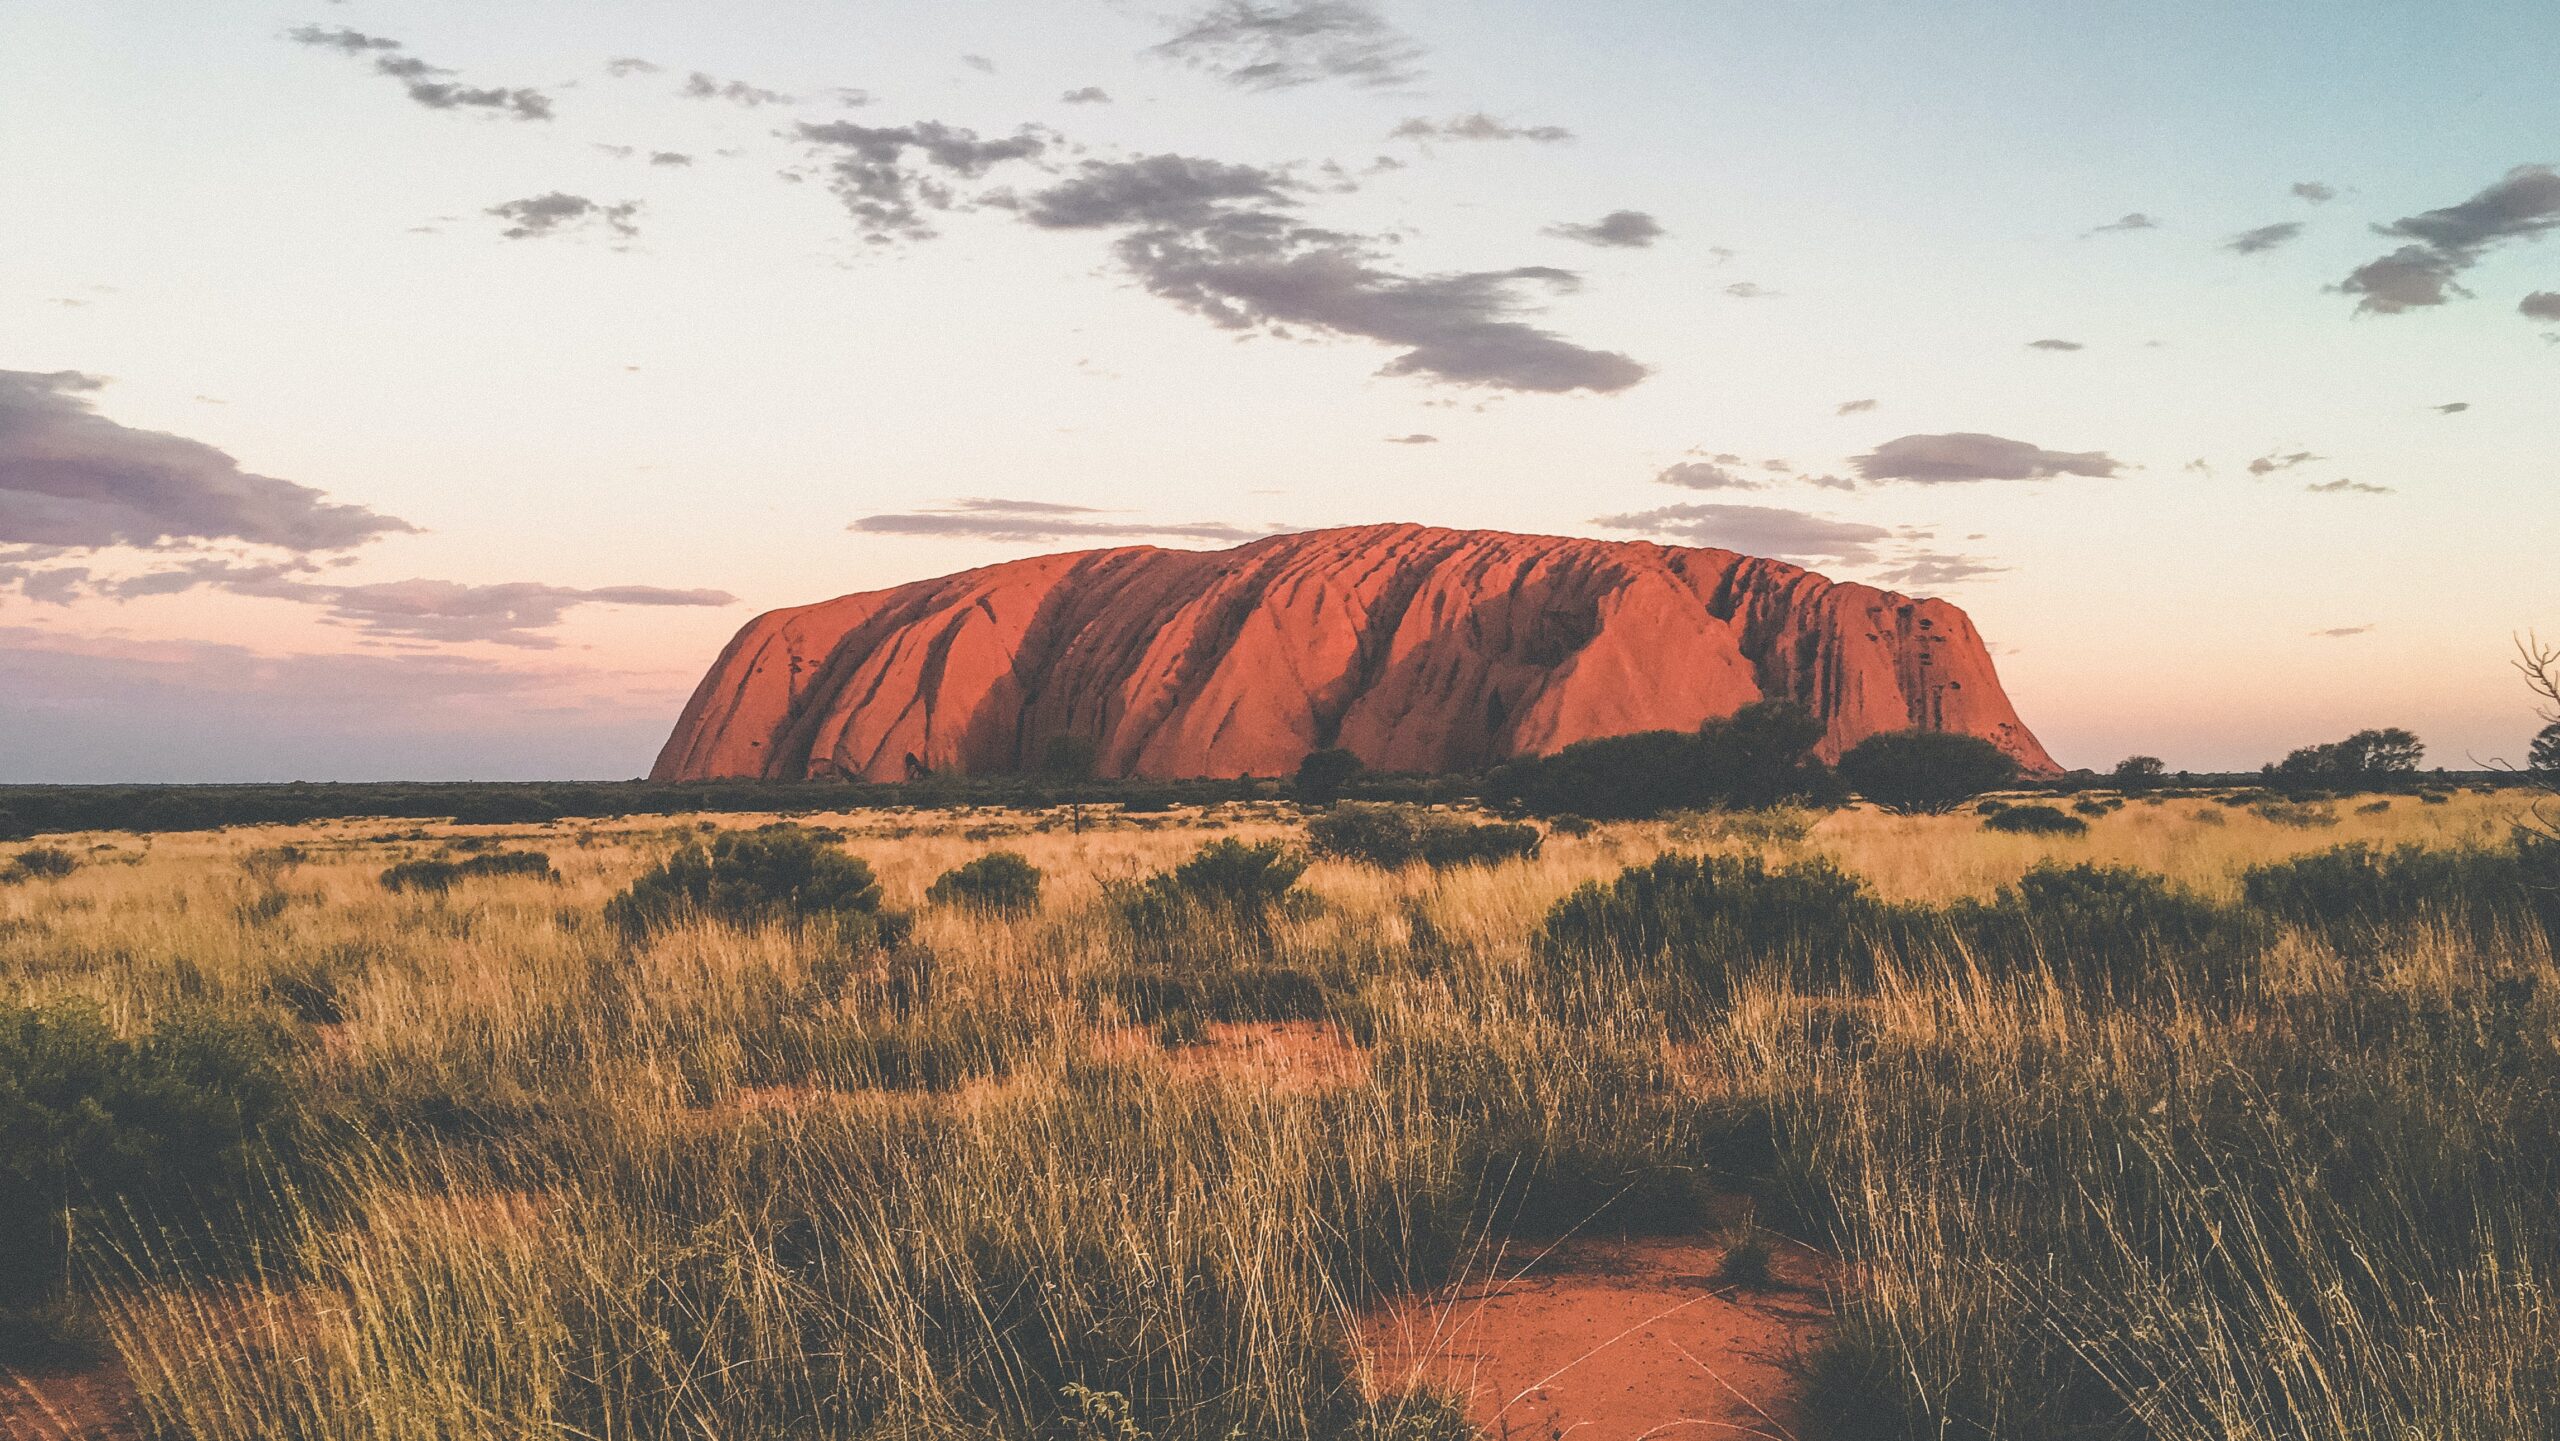 No Australia Travel Guide would be complete without the Uluru